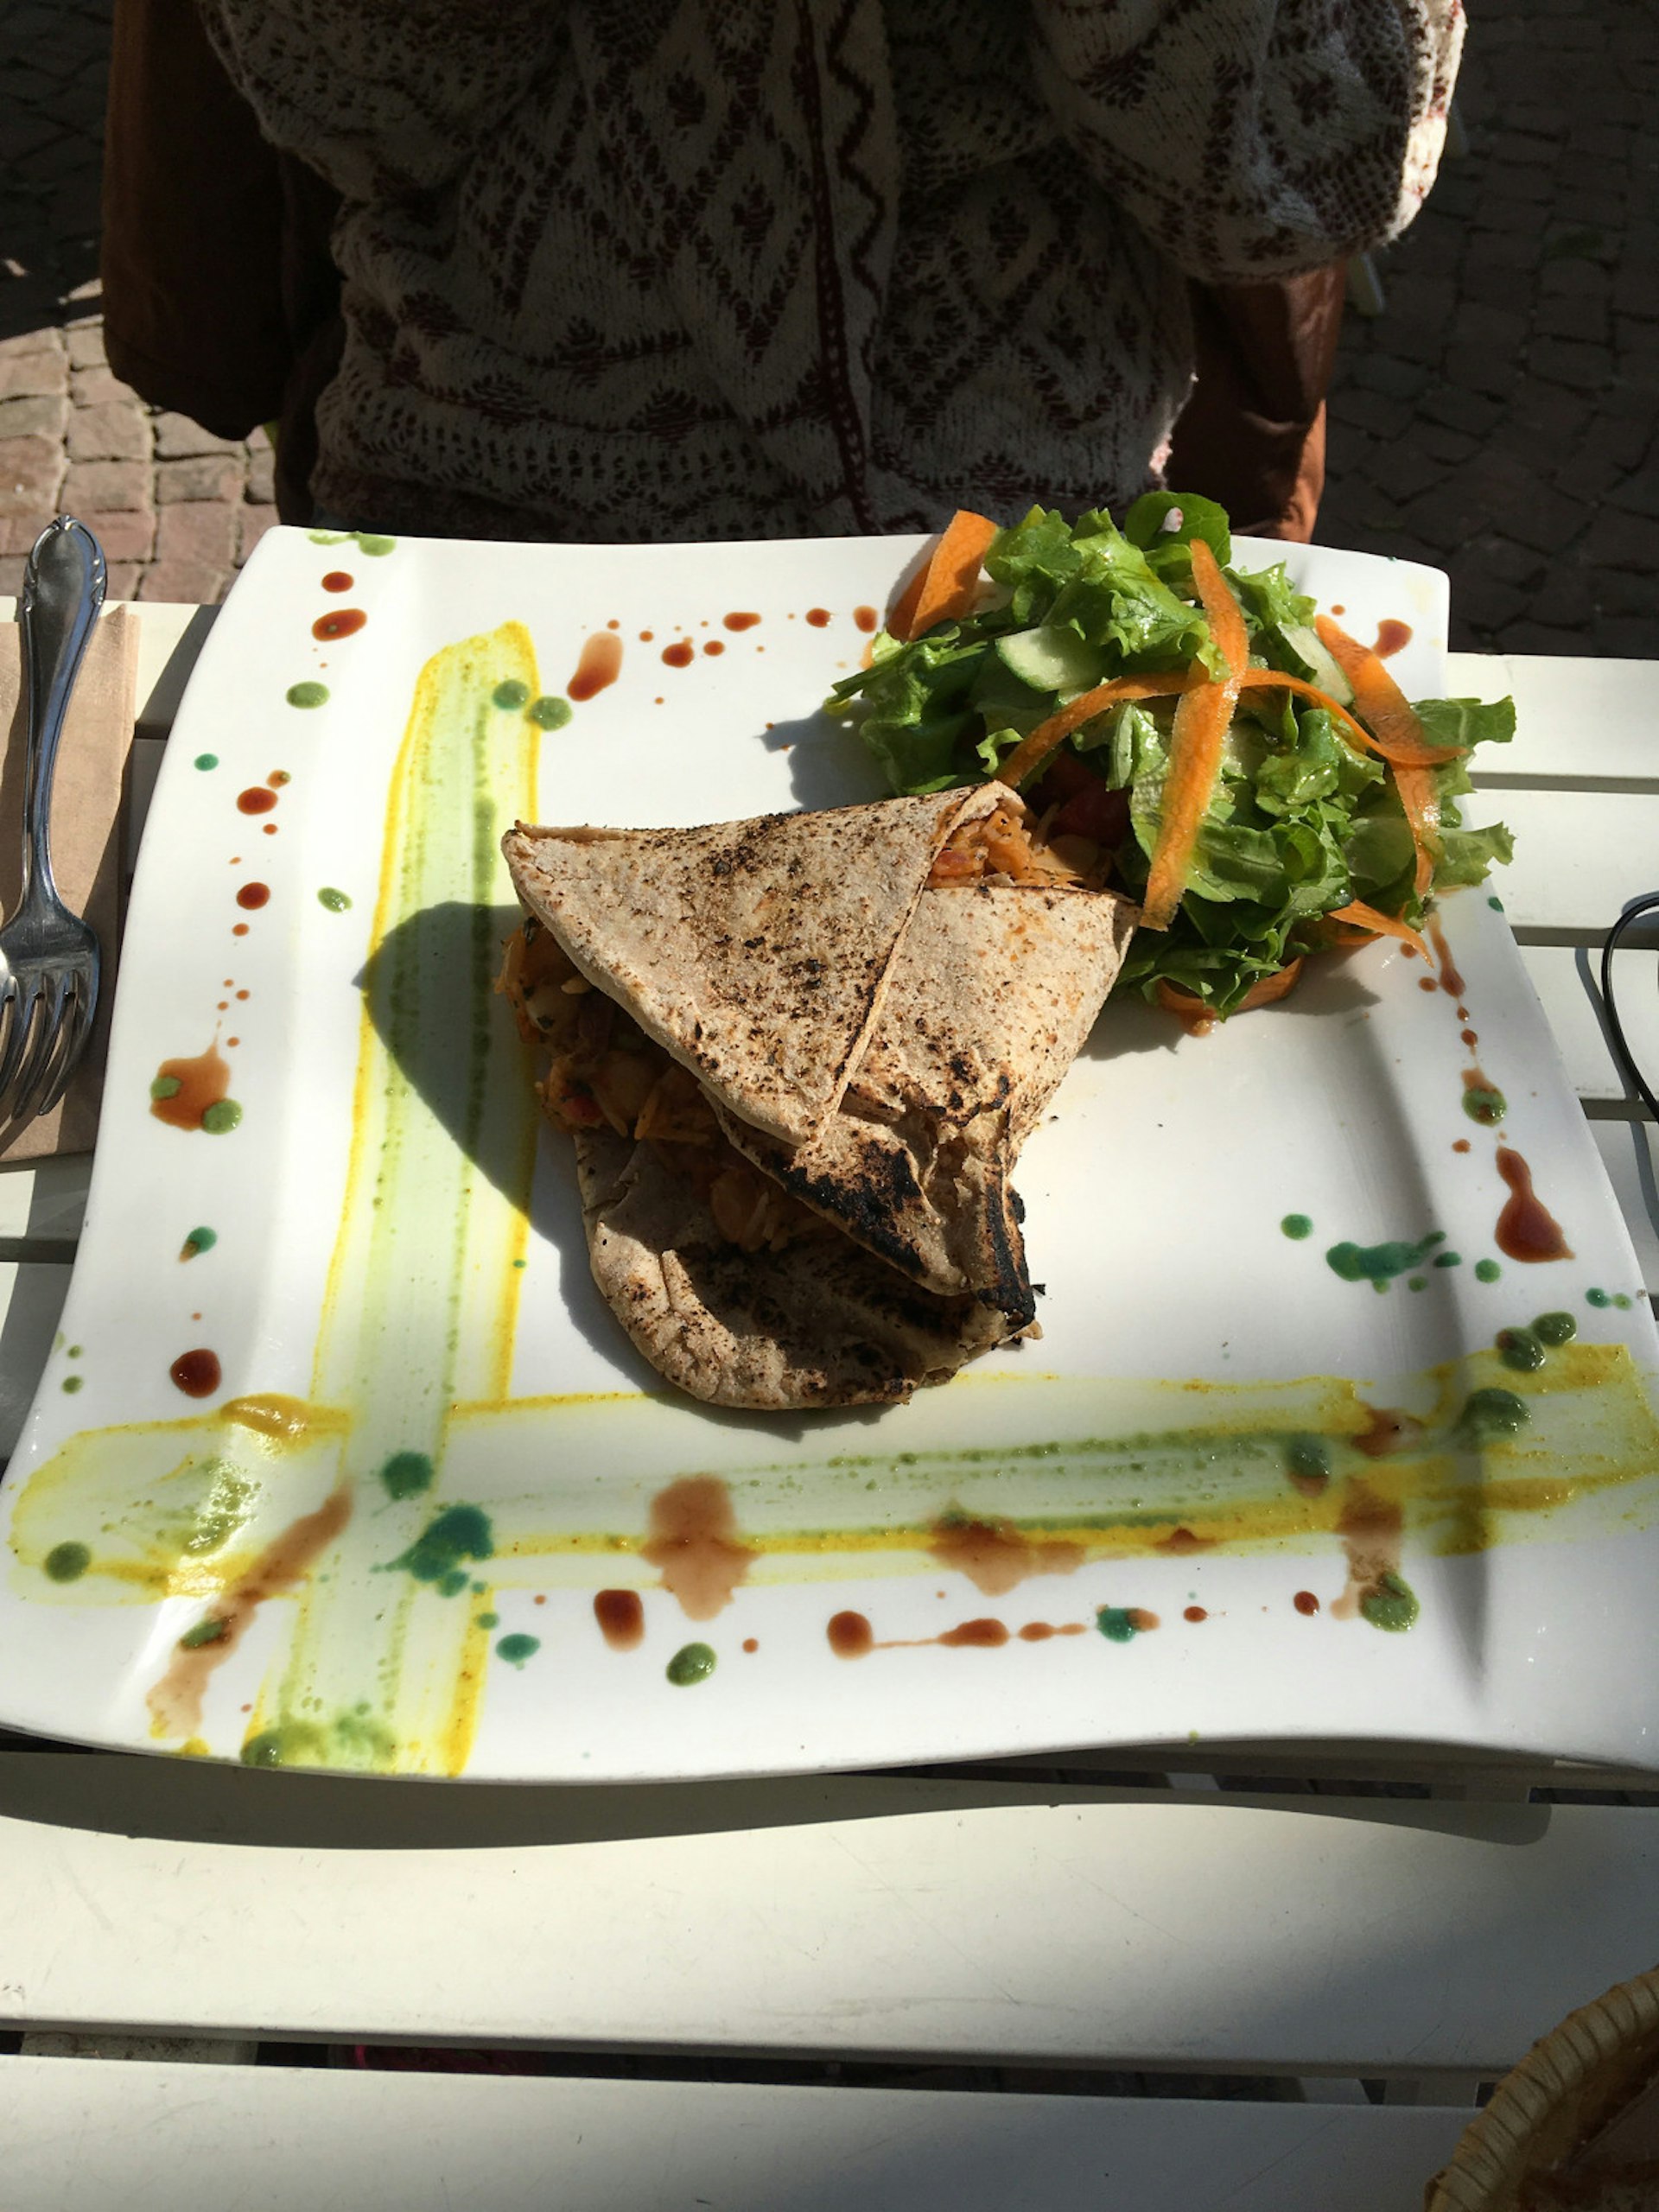 One of the inventive vegetarian dishes on offer at Sun & Moon restaurant in Sofia